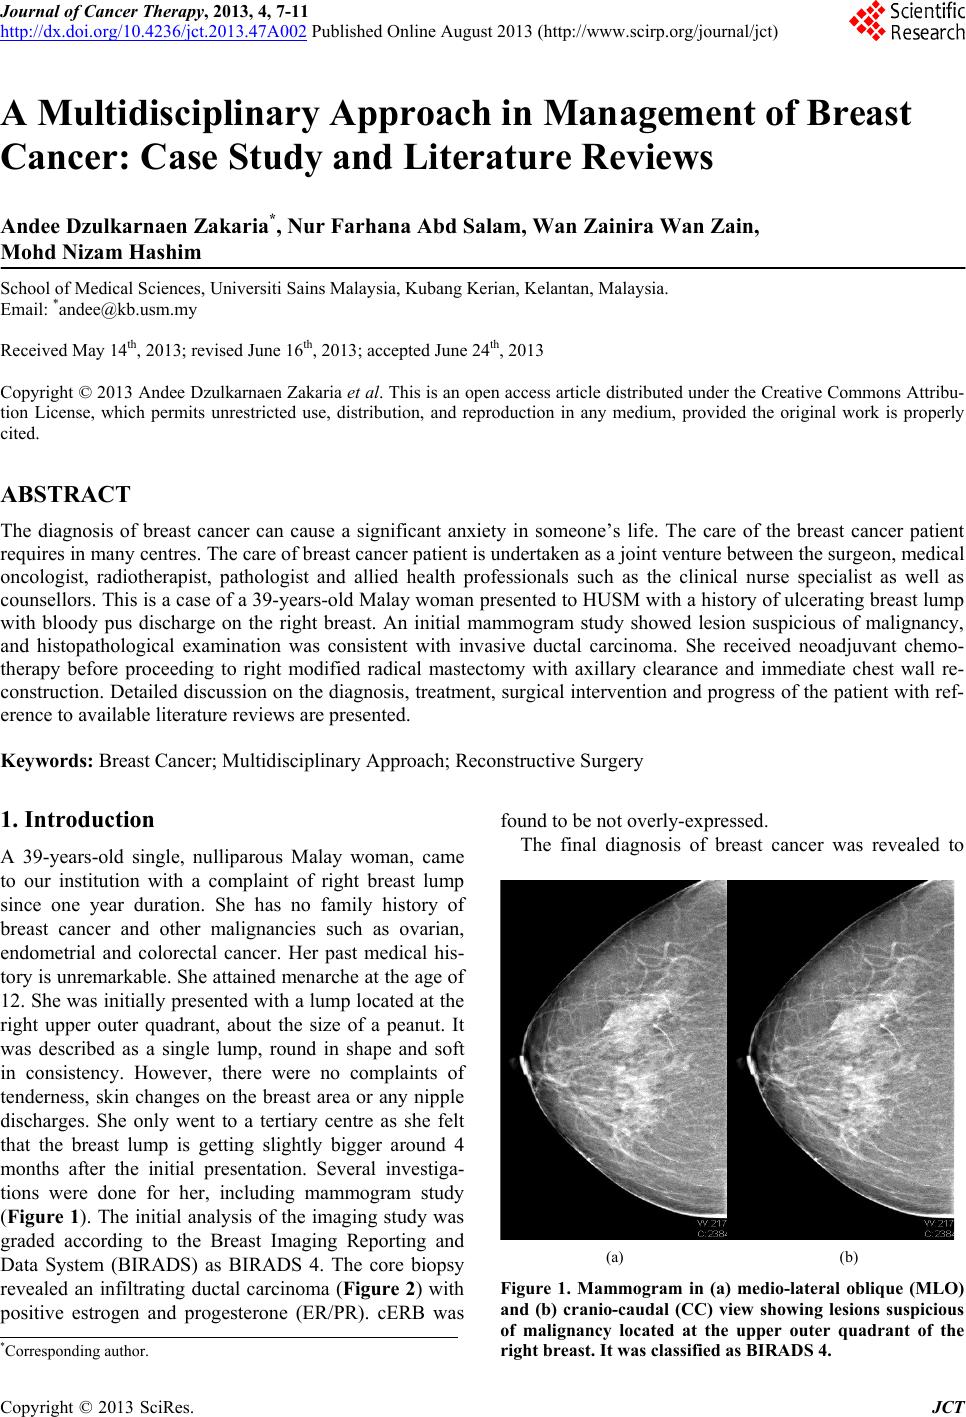 research papers on breast cancer detection